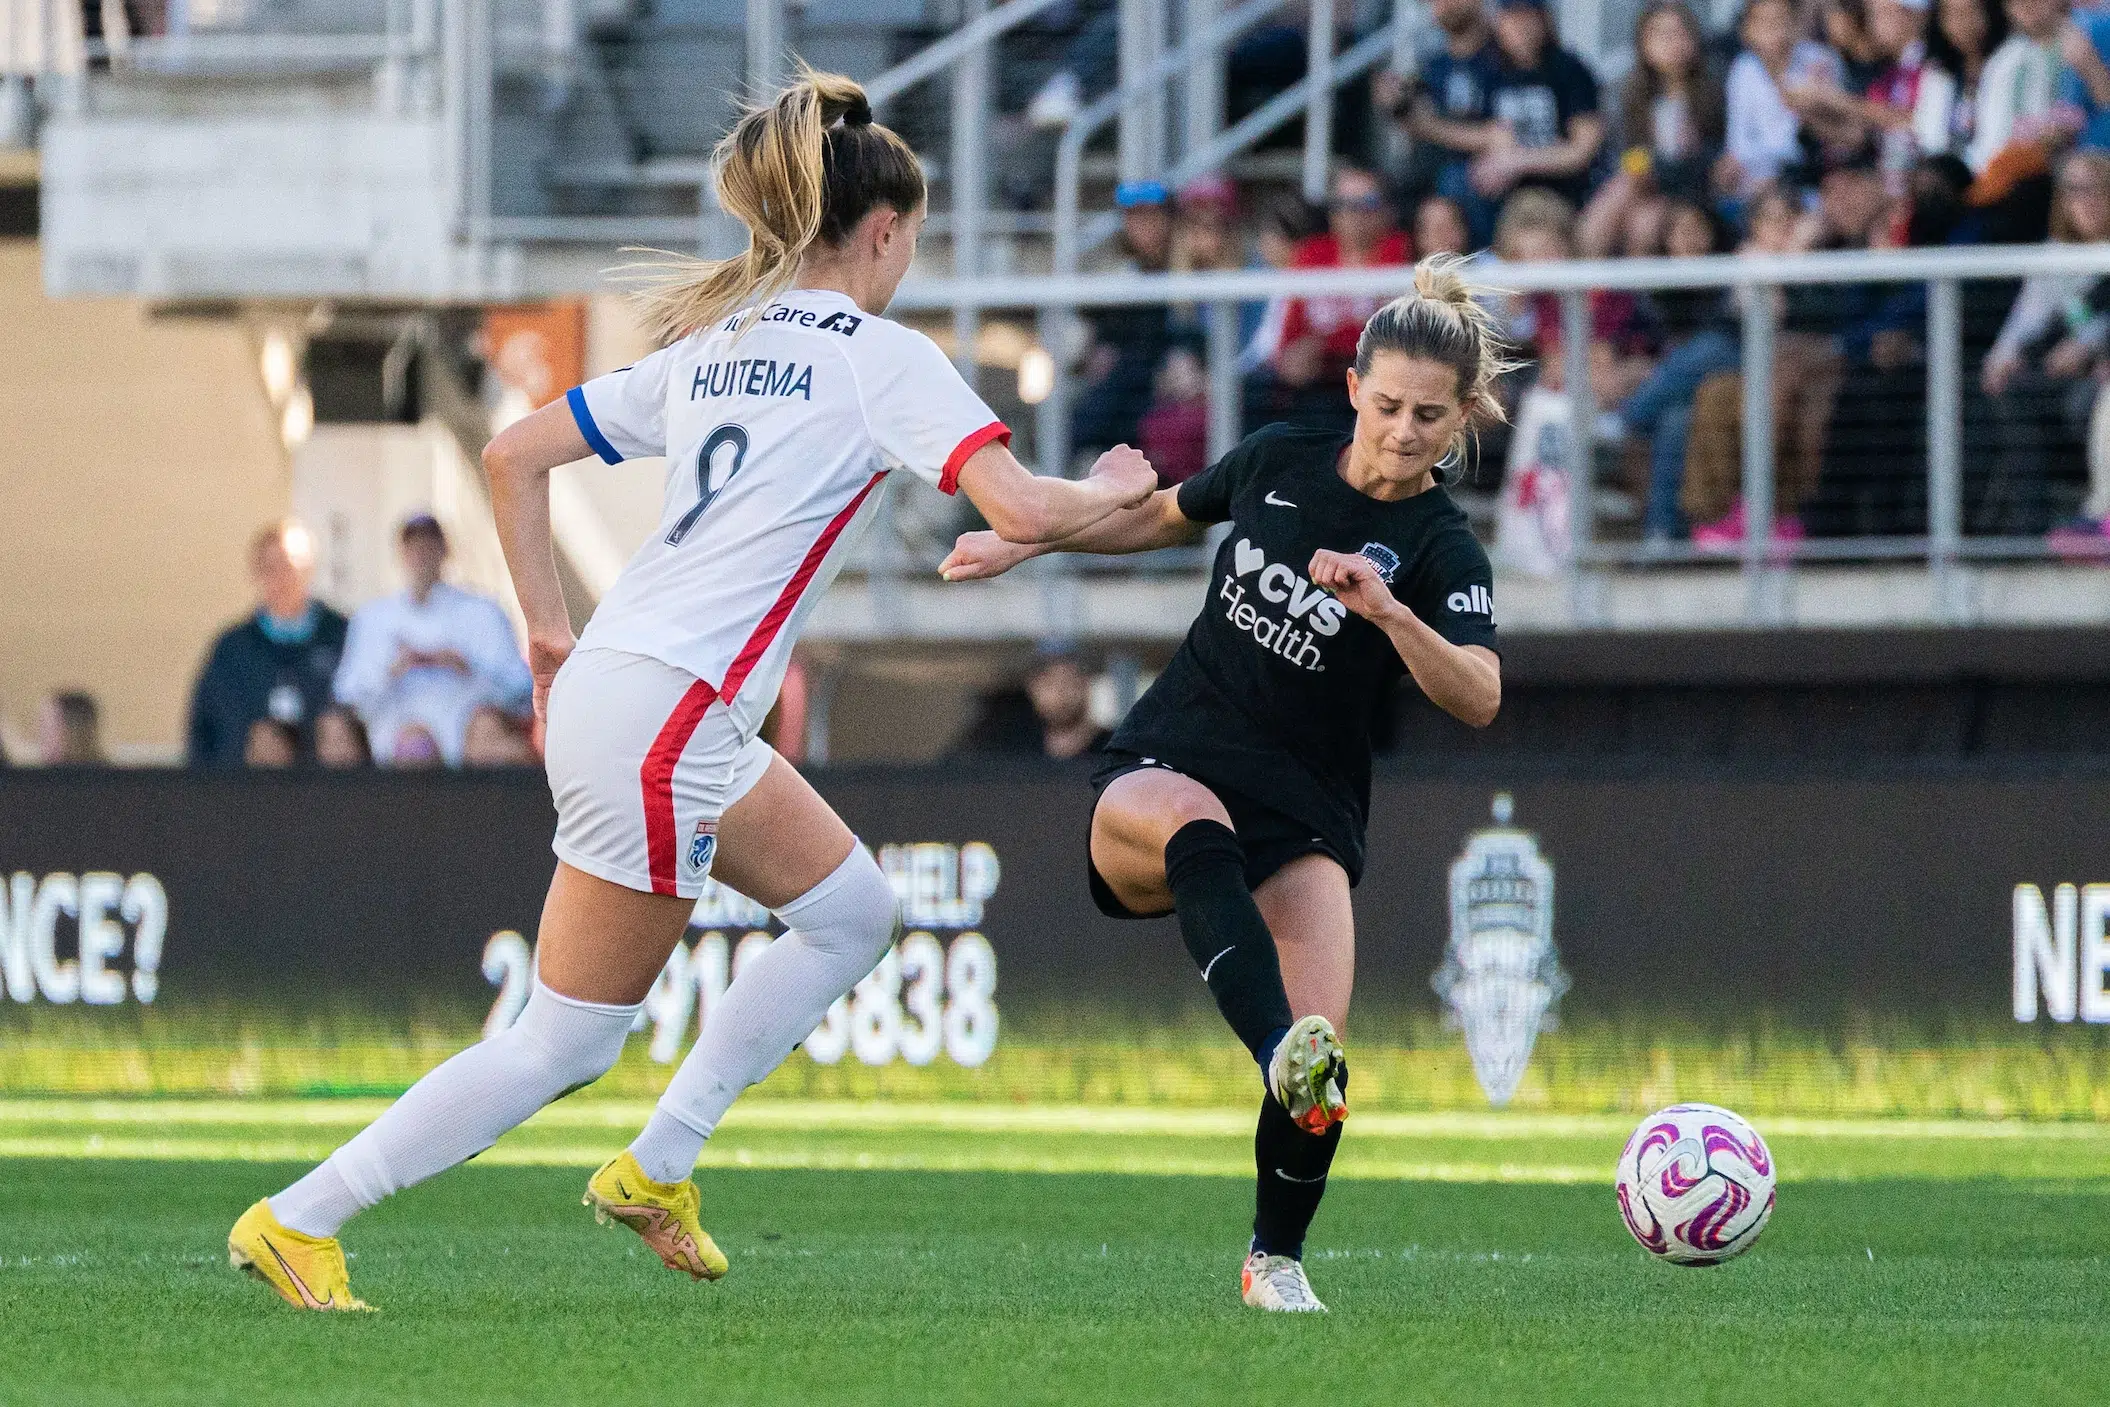 Bayley Feist in a black jersey, black shorts and black socks kicks a soccer ball past a defender in a white uniform.